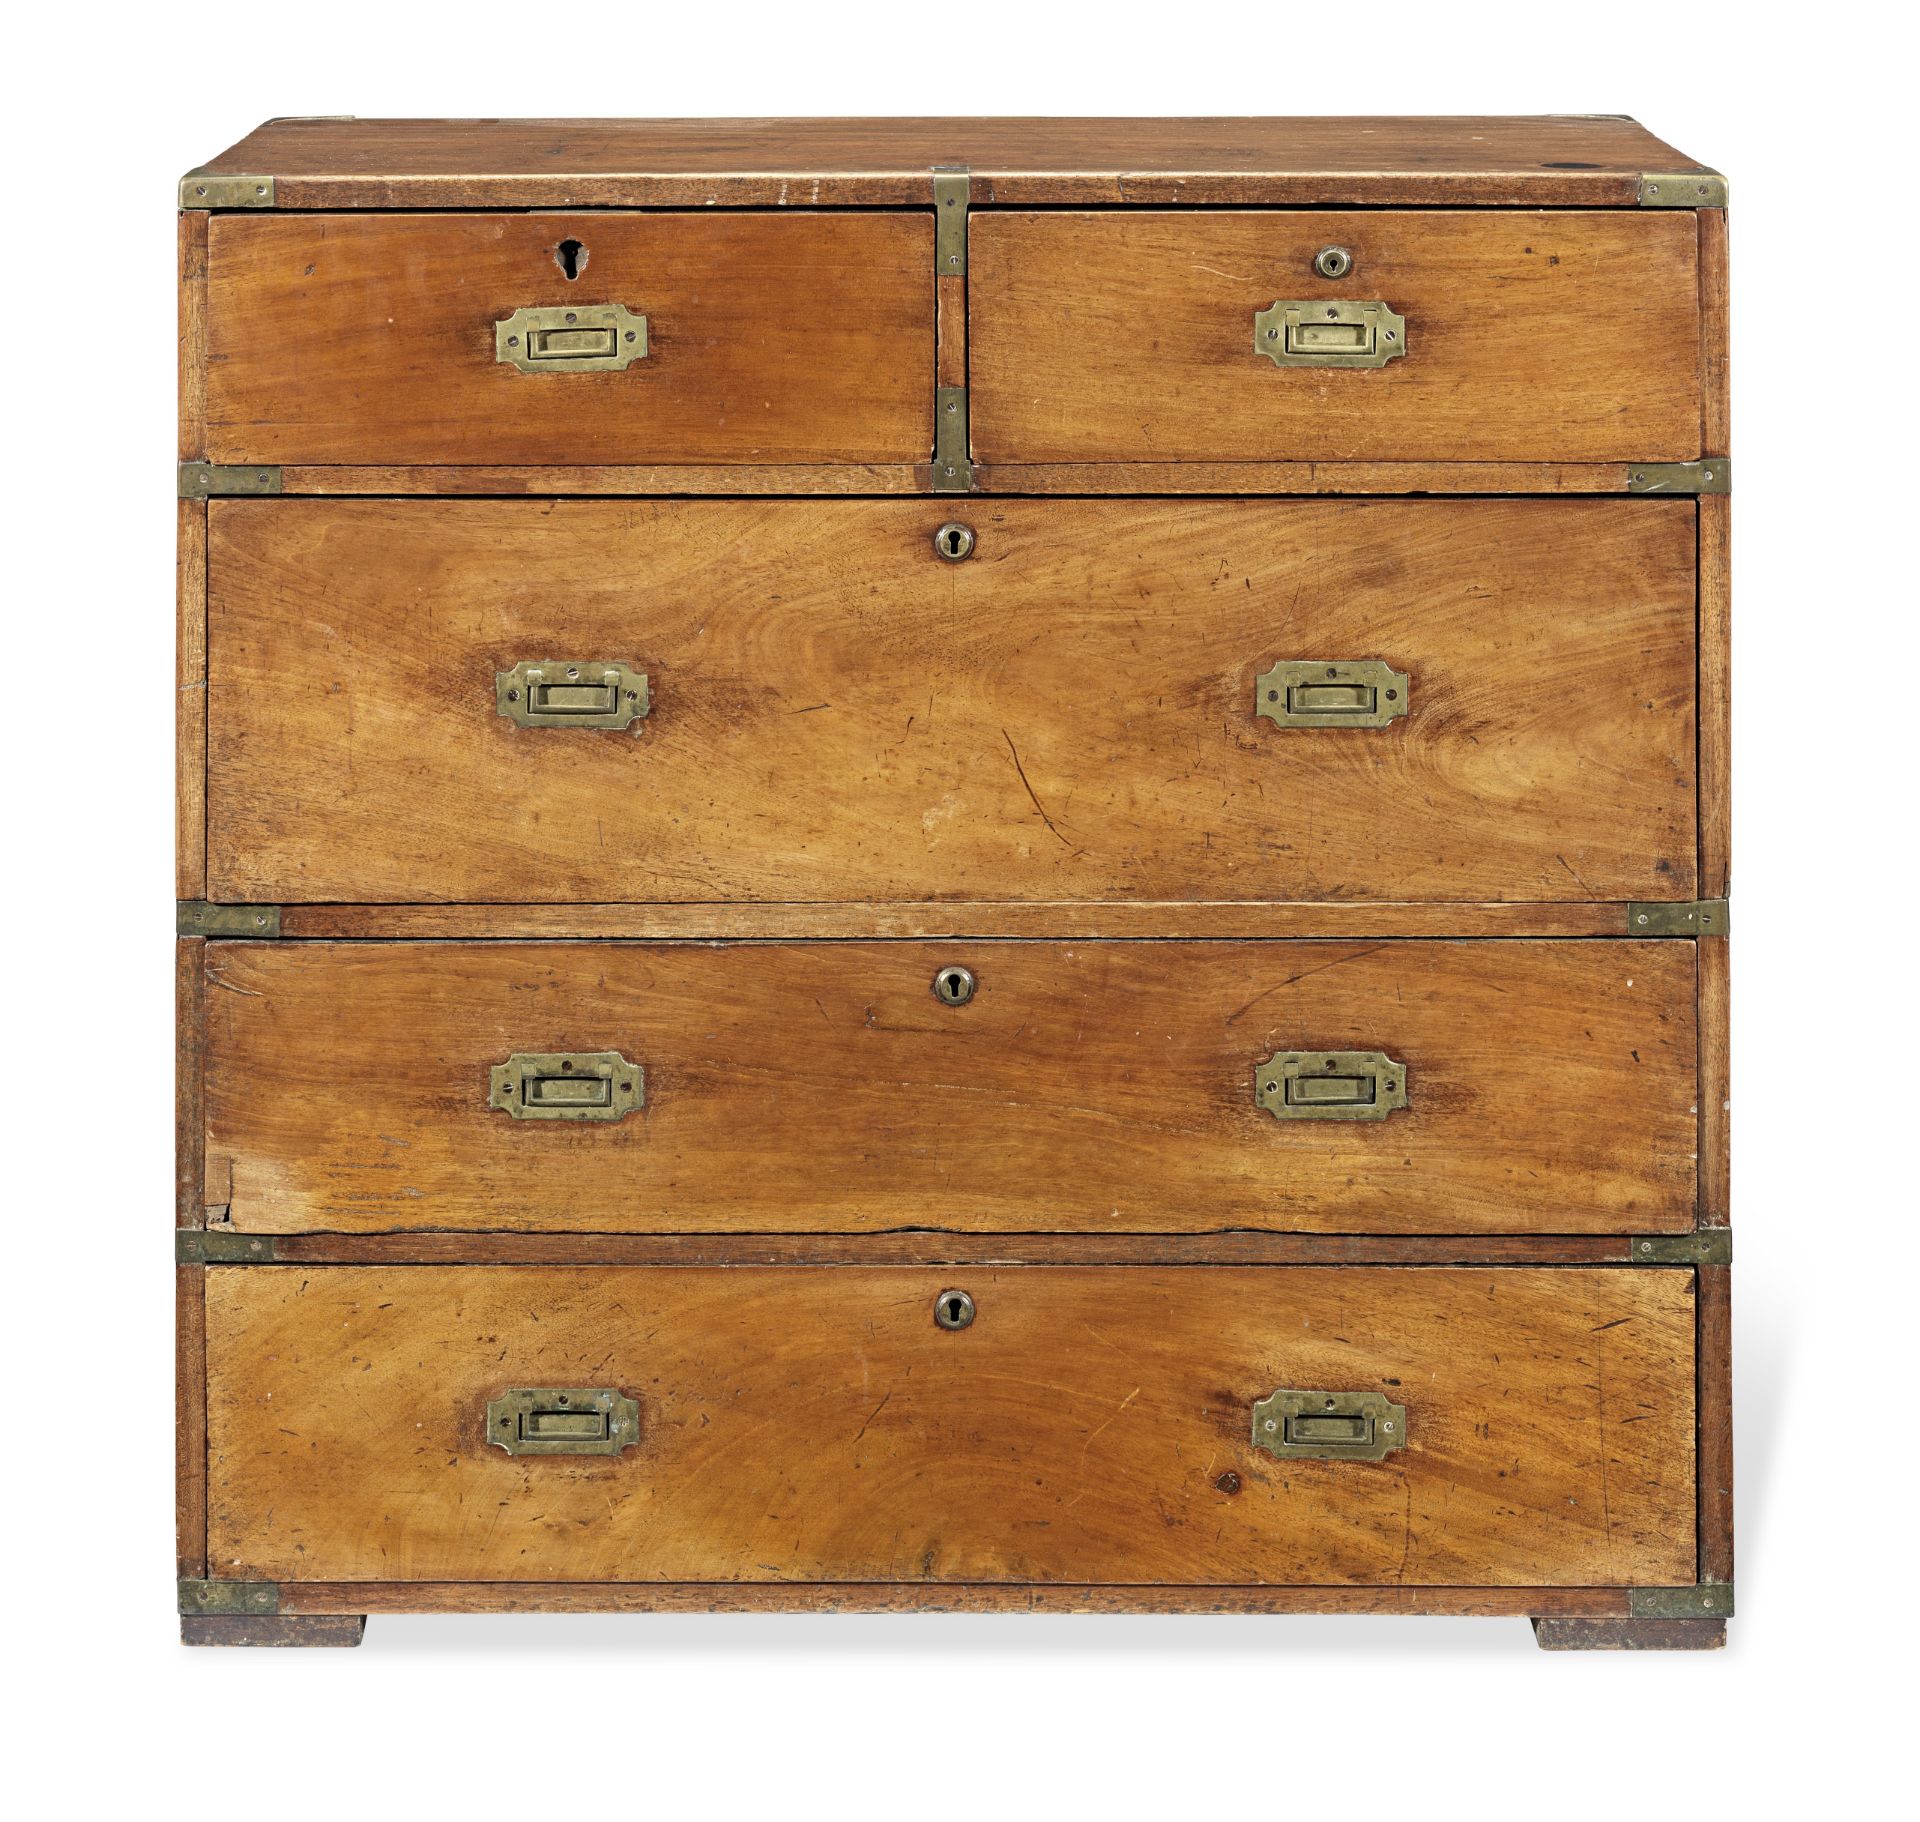 A Victorian mahogany and brass mounted campaign chest